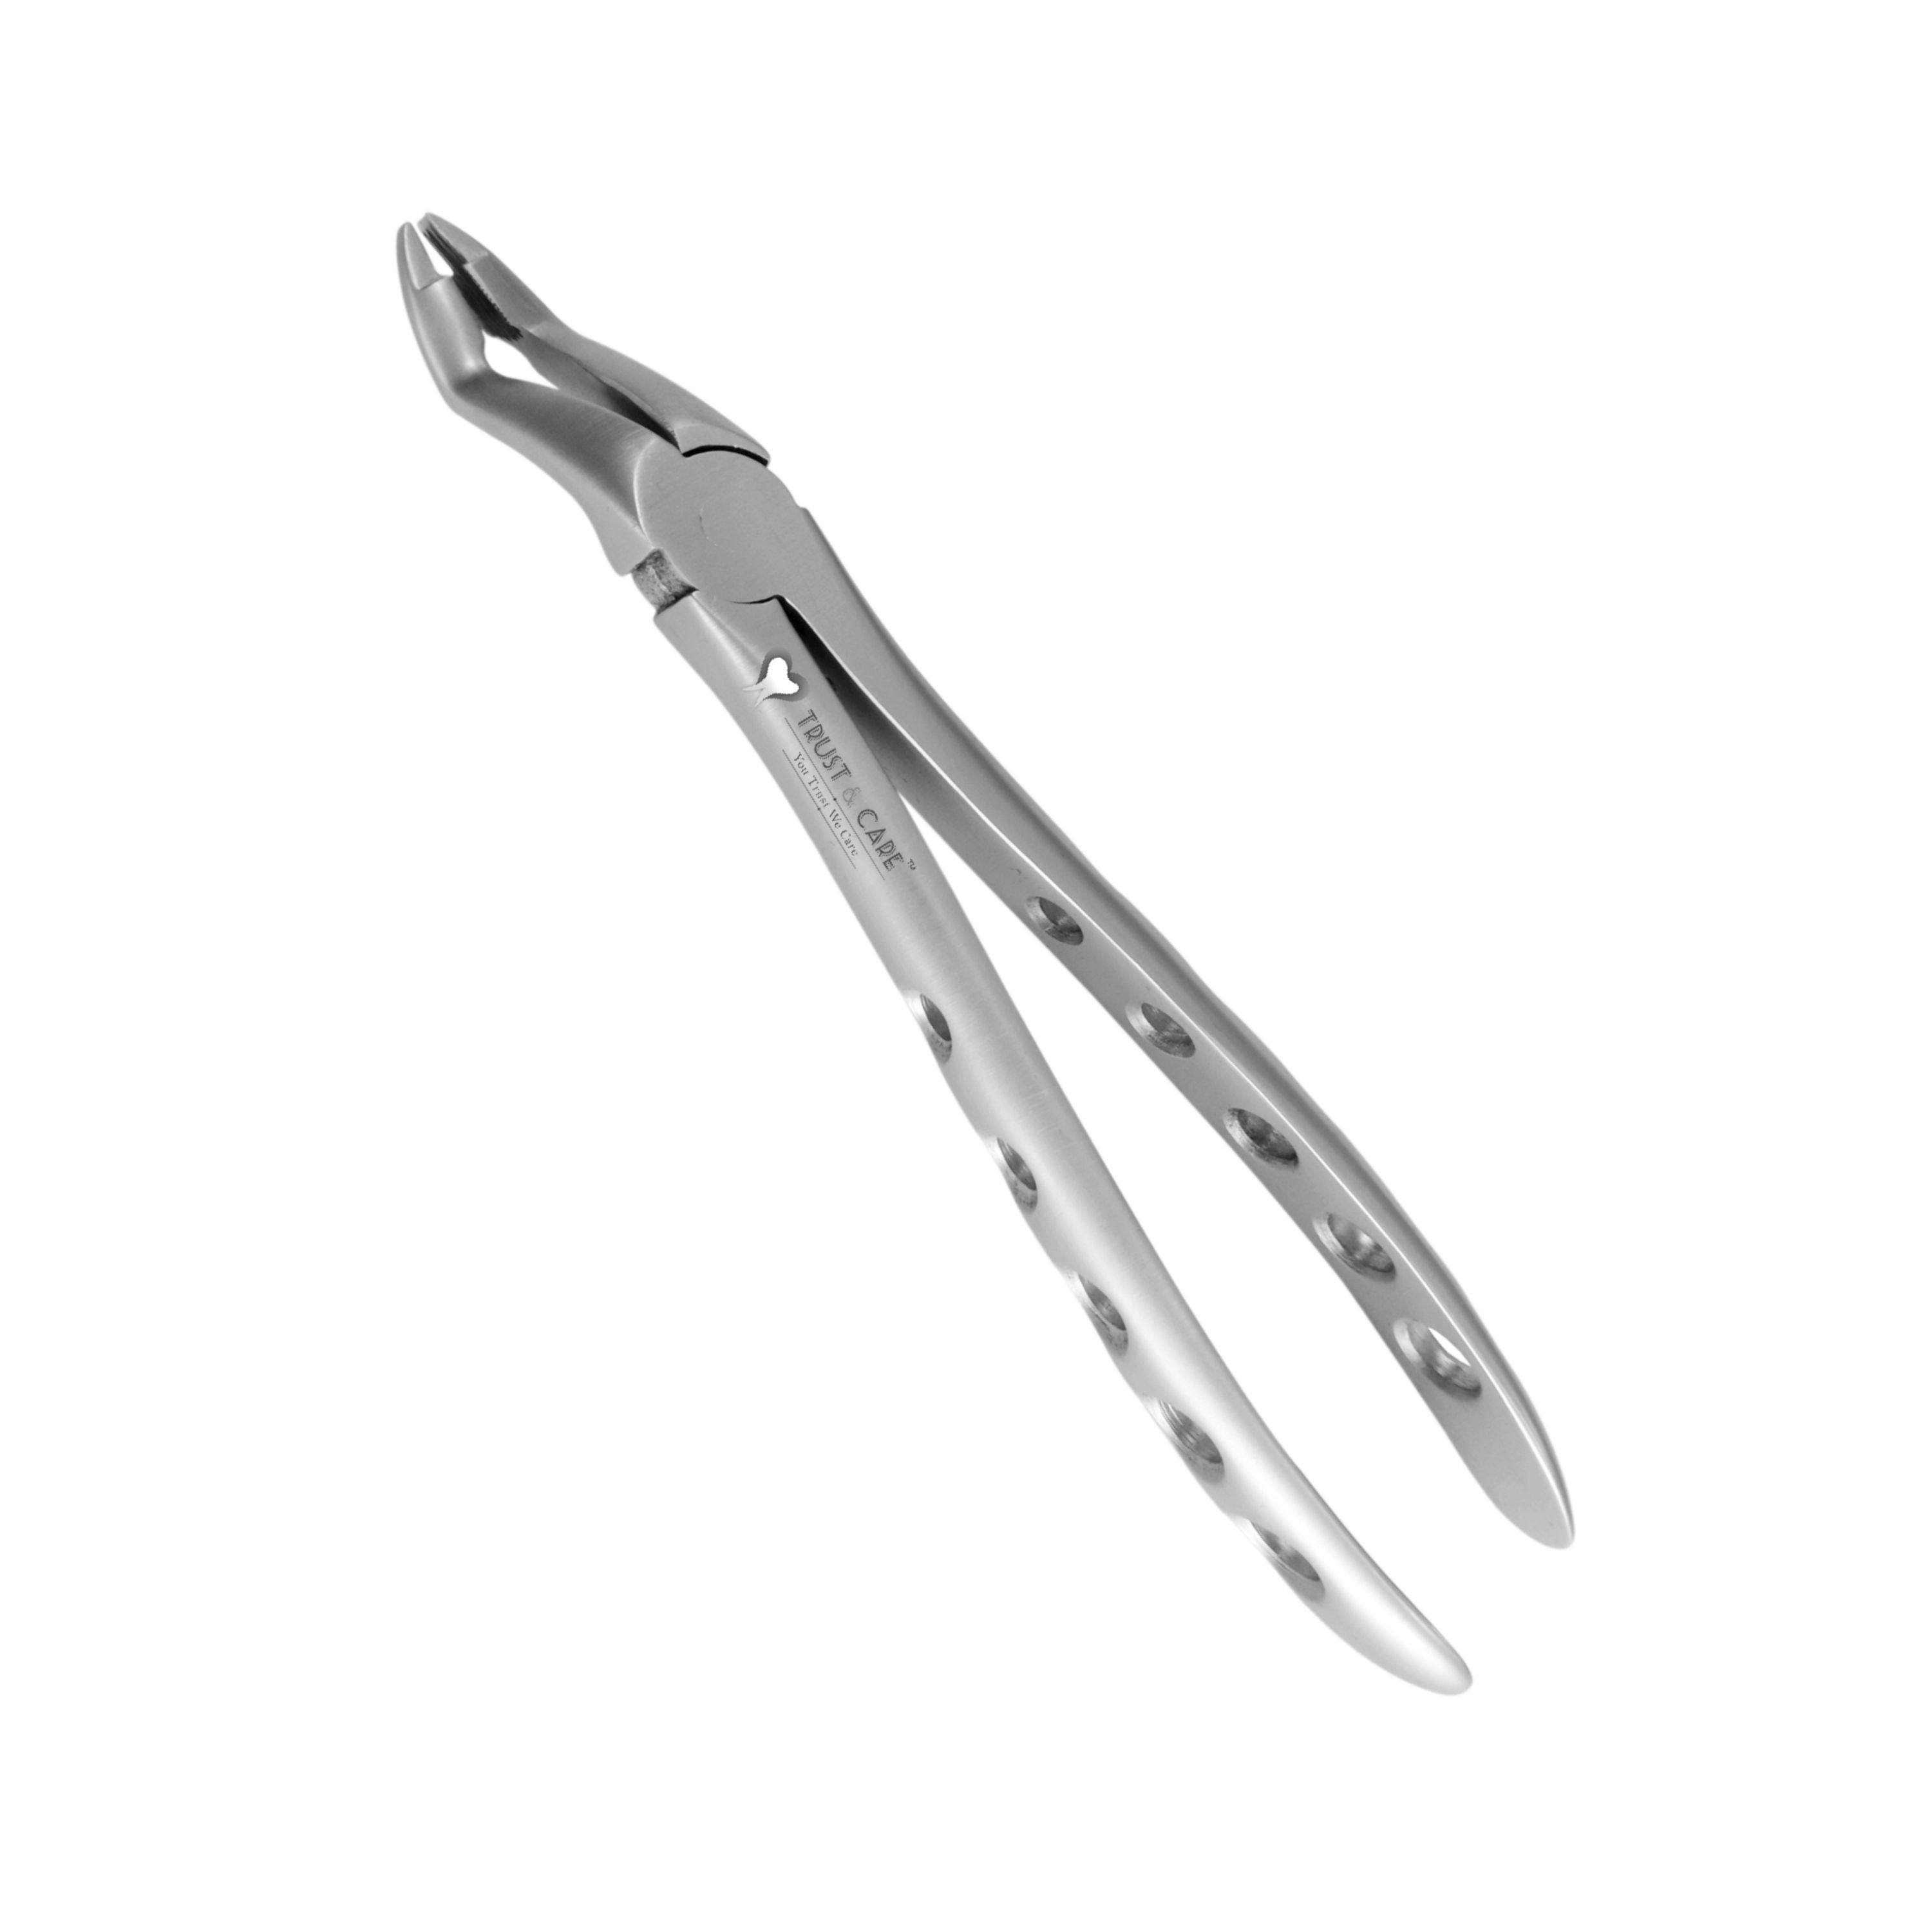 Trust & Care Atraumatic Forcep Upper Roots Fig No. 51A